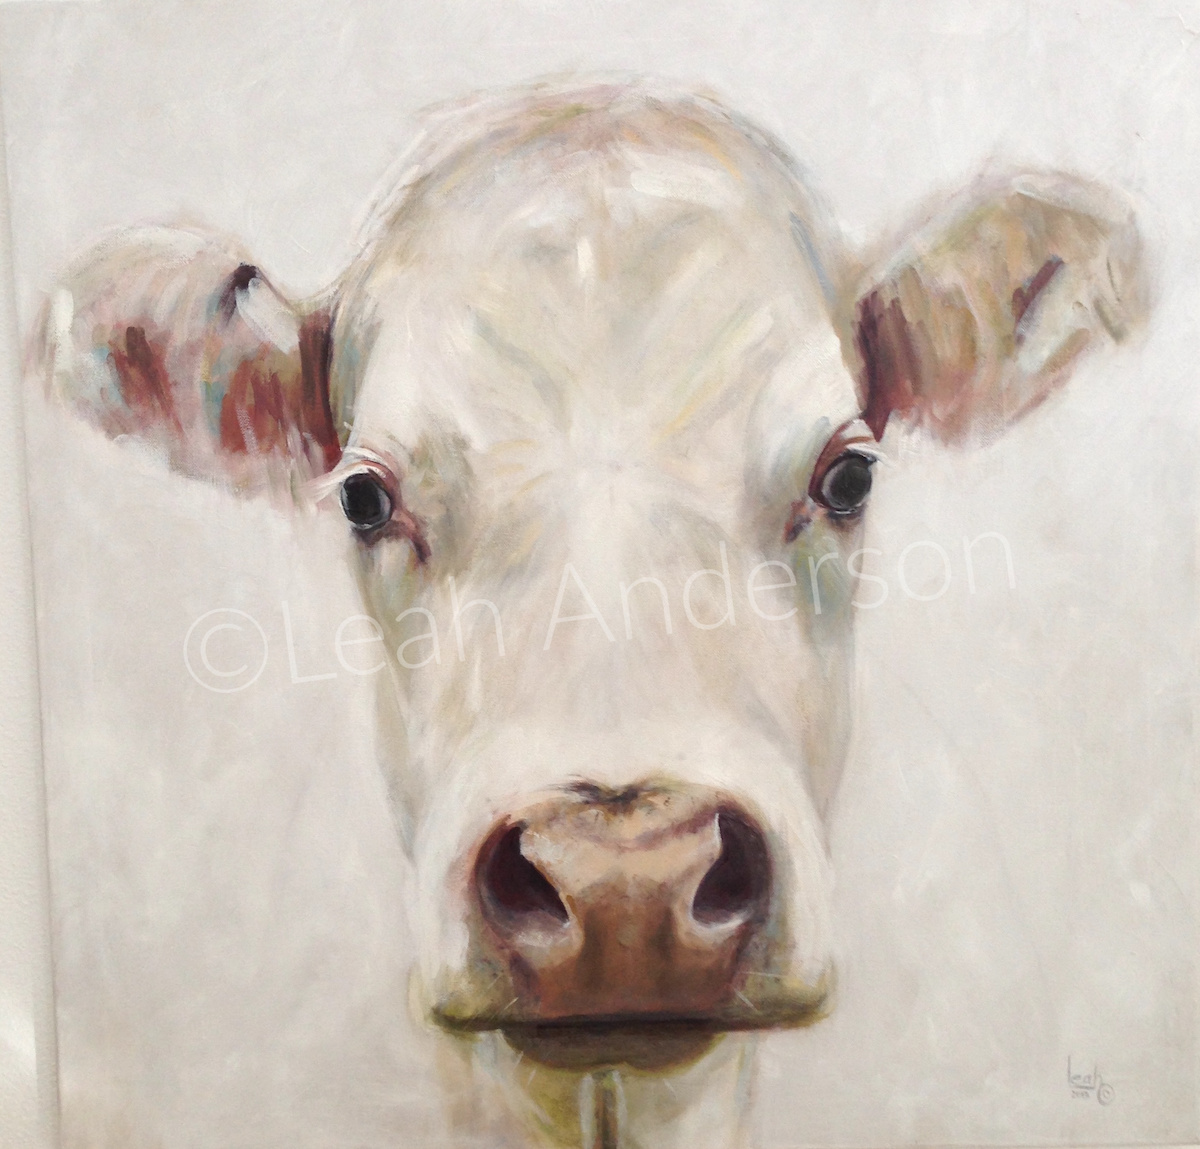 Lone Cow painting by Leah Anderson.